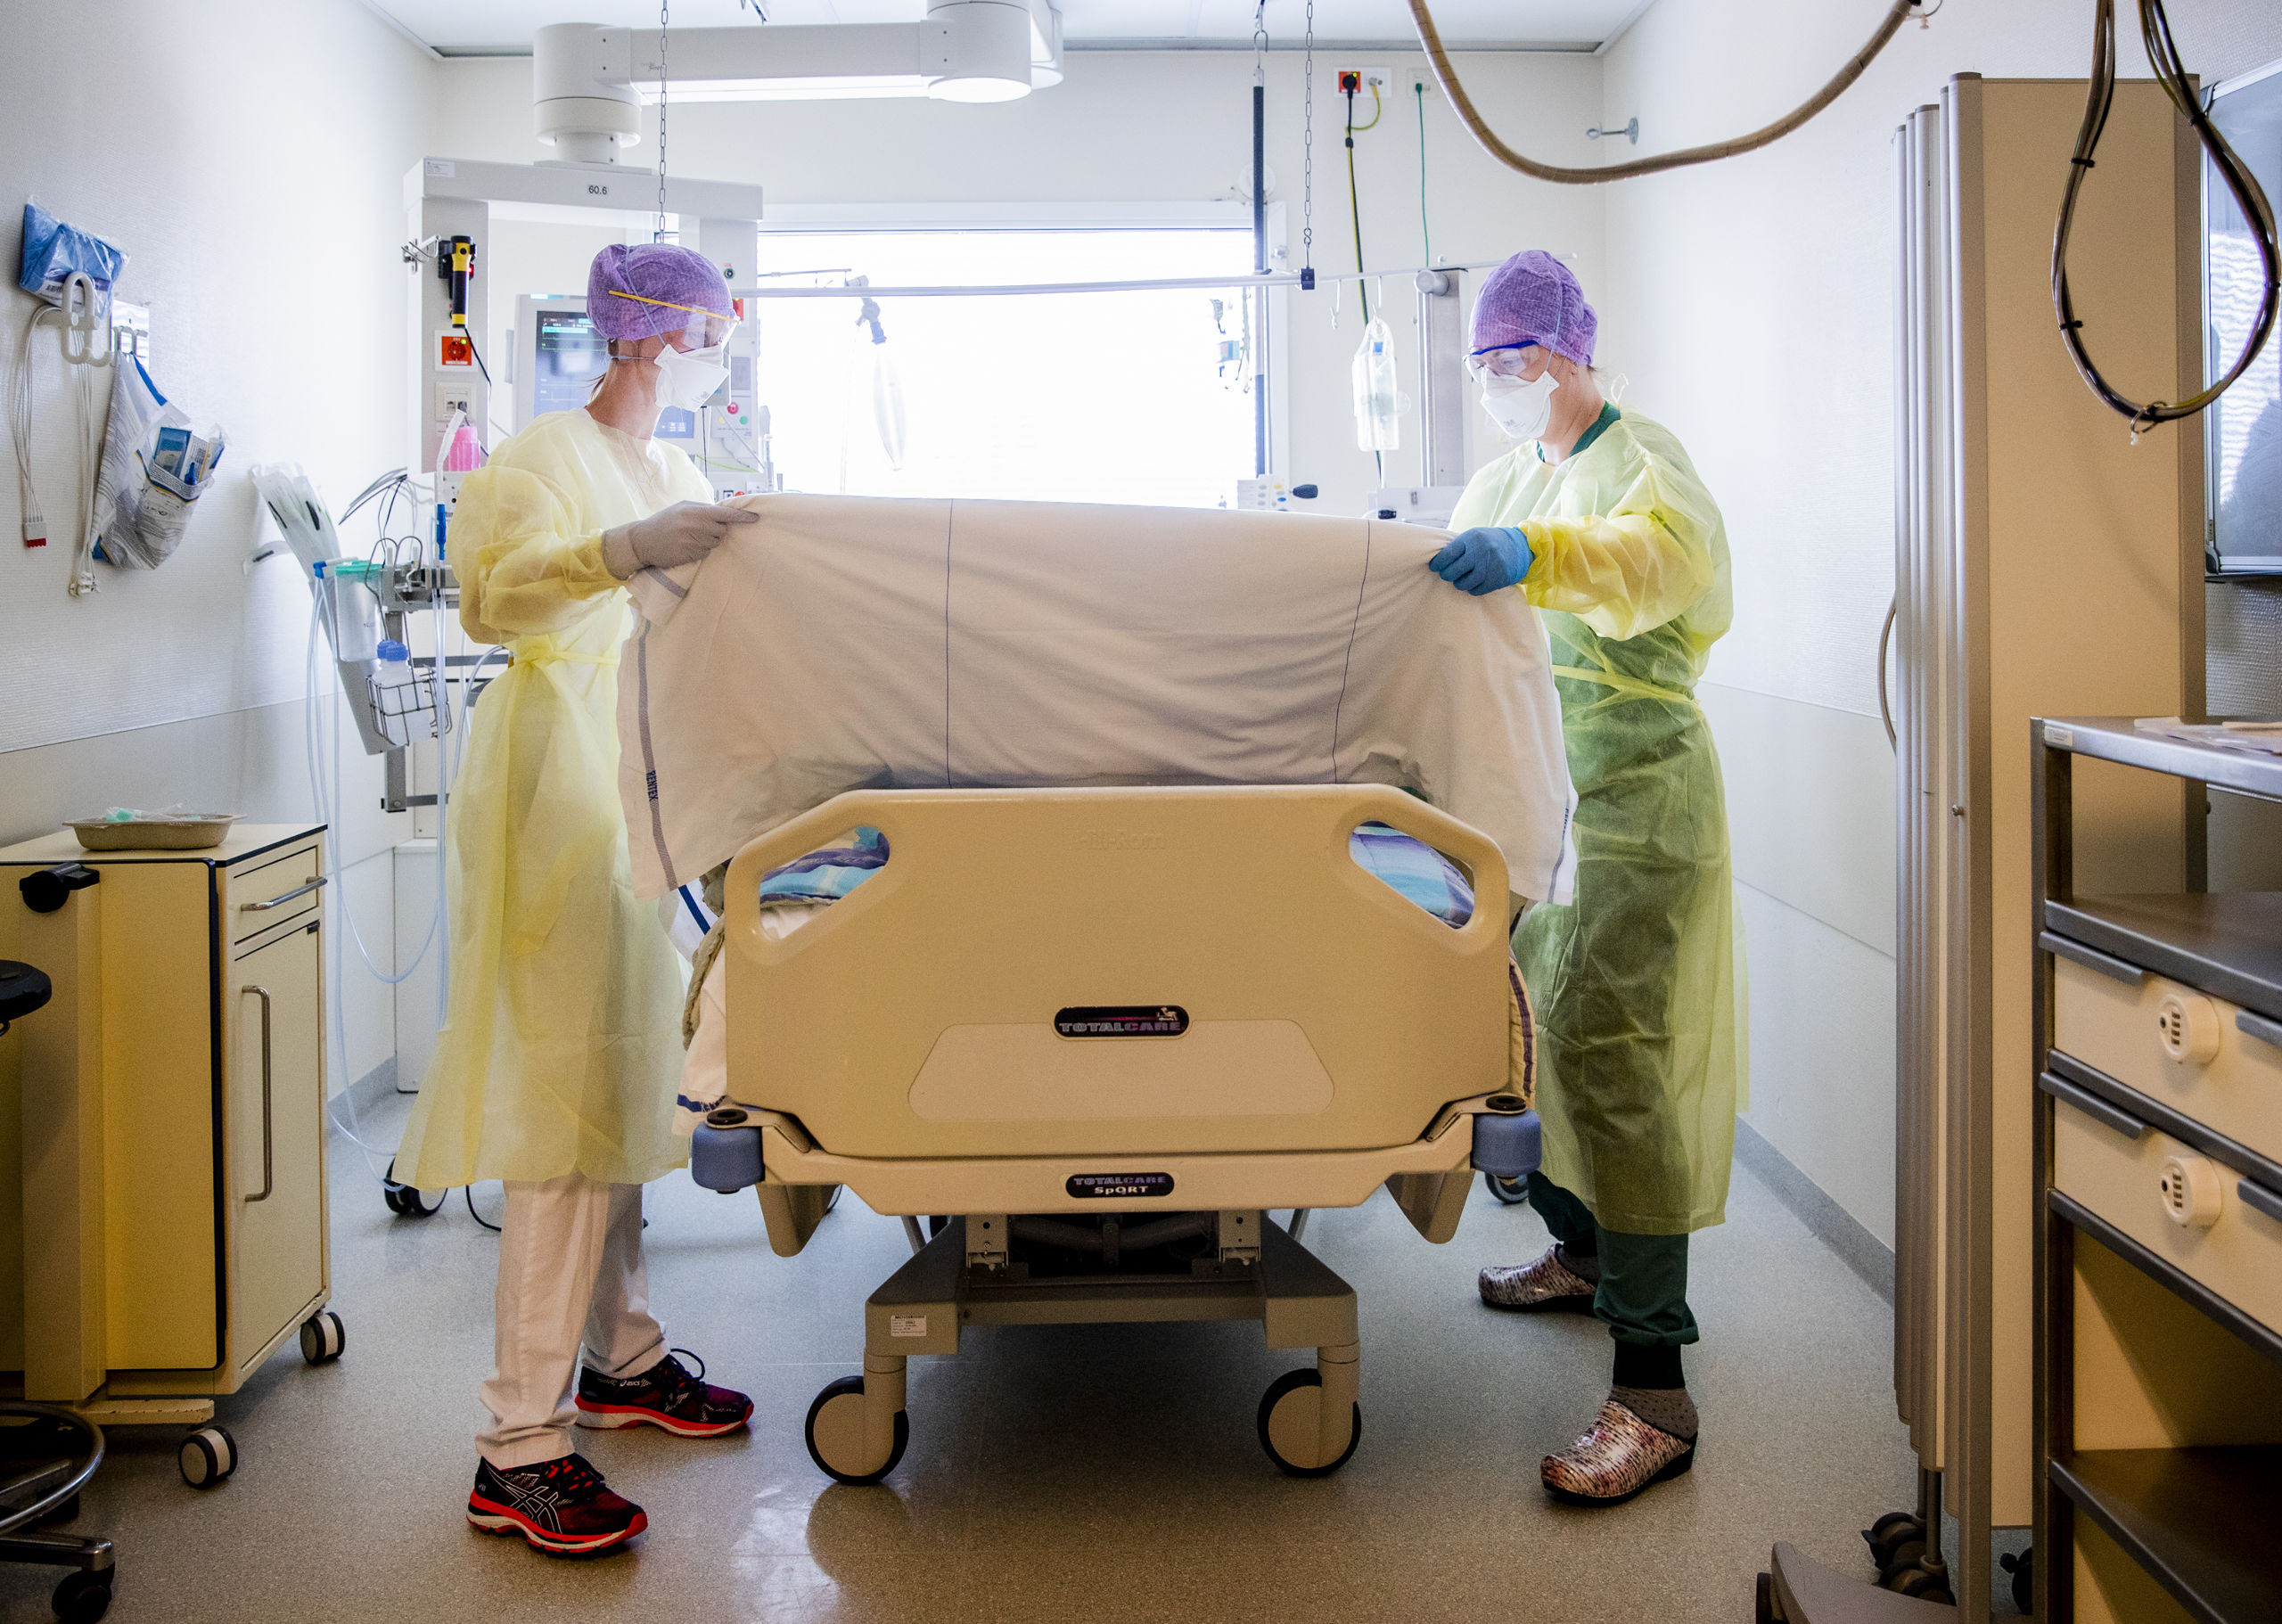 2020-05-12 13:12:49 Care workers in the intensive care unit (IC) of the HMC Westeinde hospital in The Hague, The Netherlands, May 12, 2020. The hospital expanded the number of beds in the ICU at the beginning of the corona crisis. ANP REMKO DE WAAL